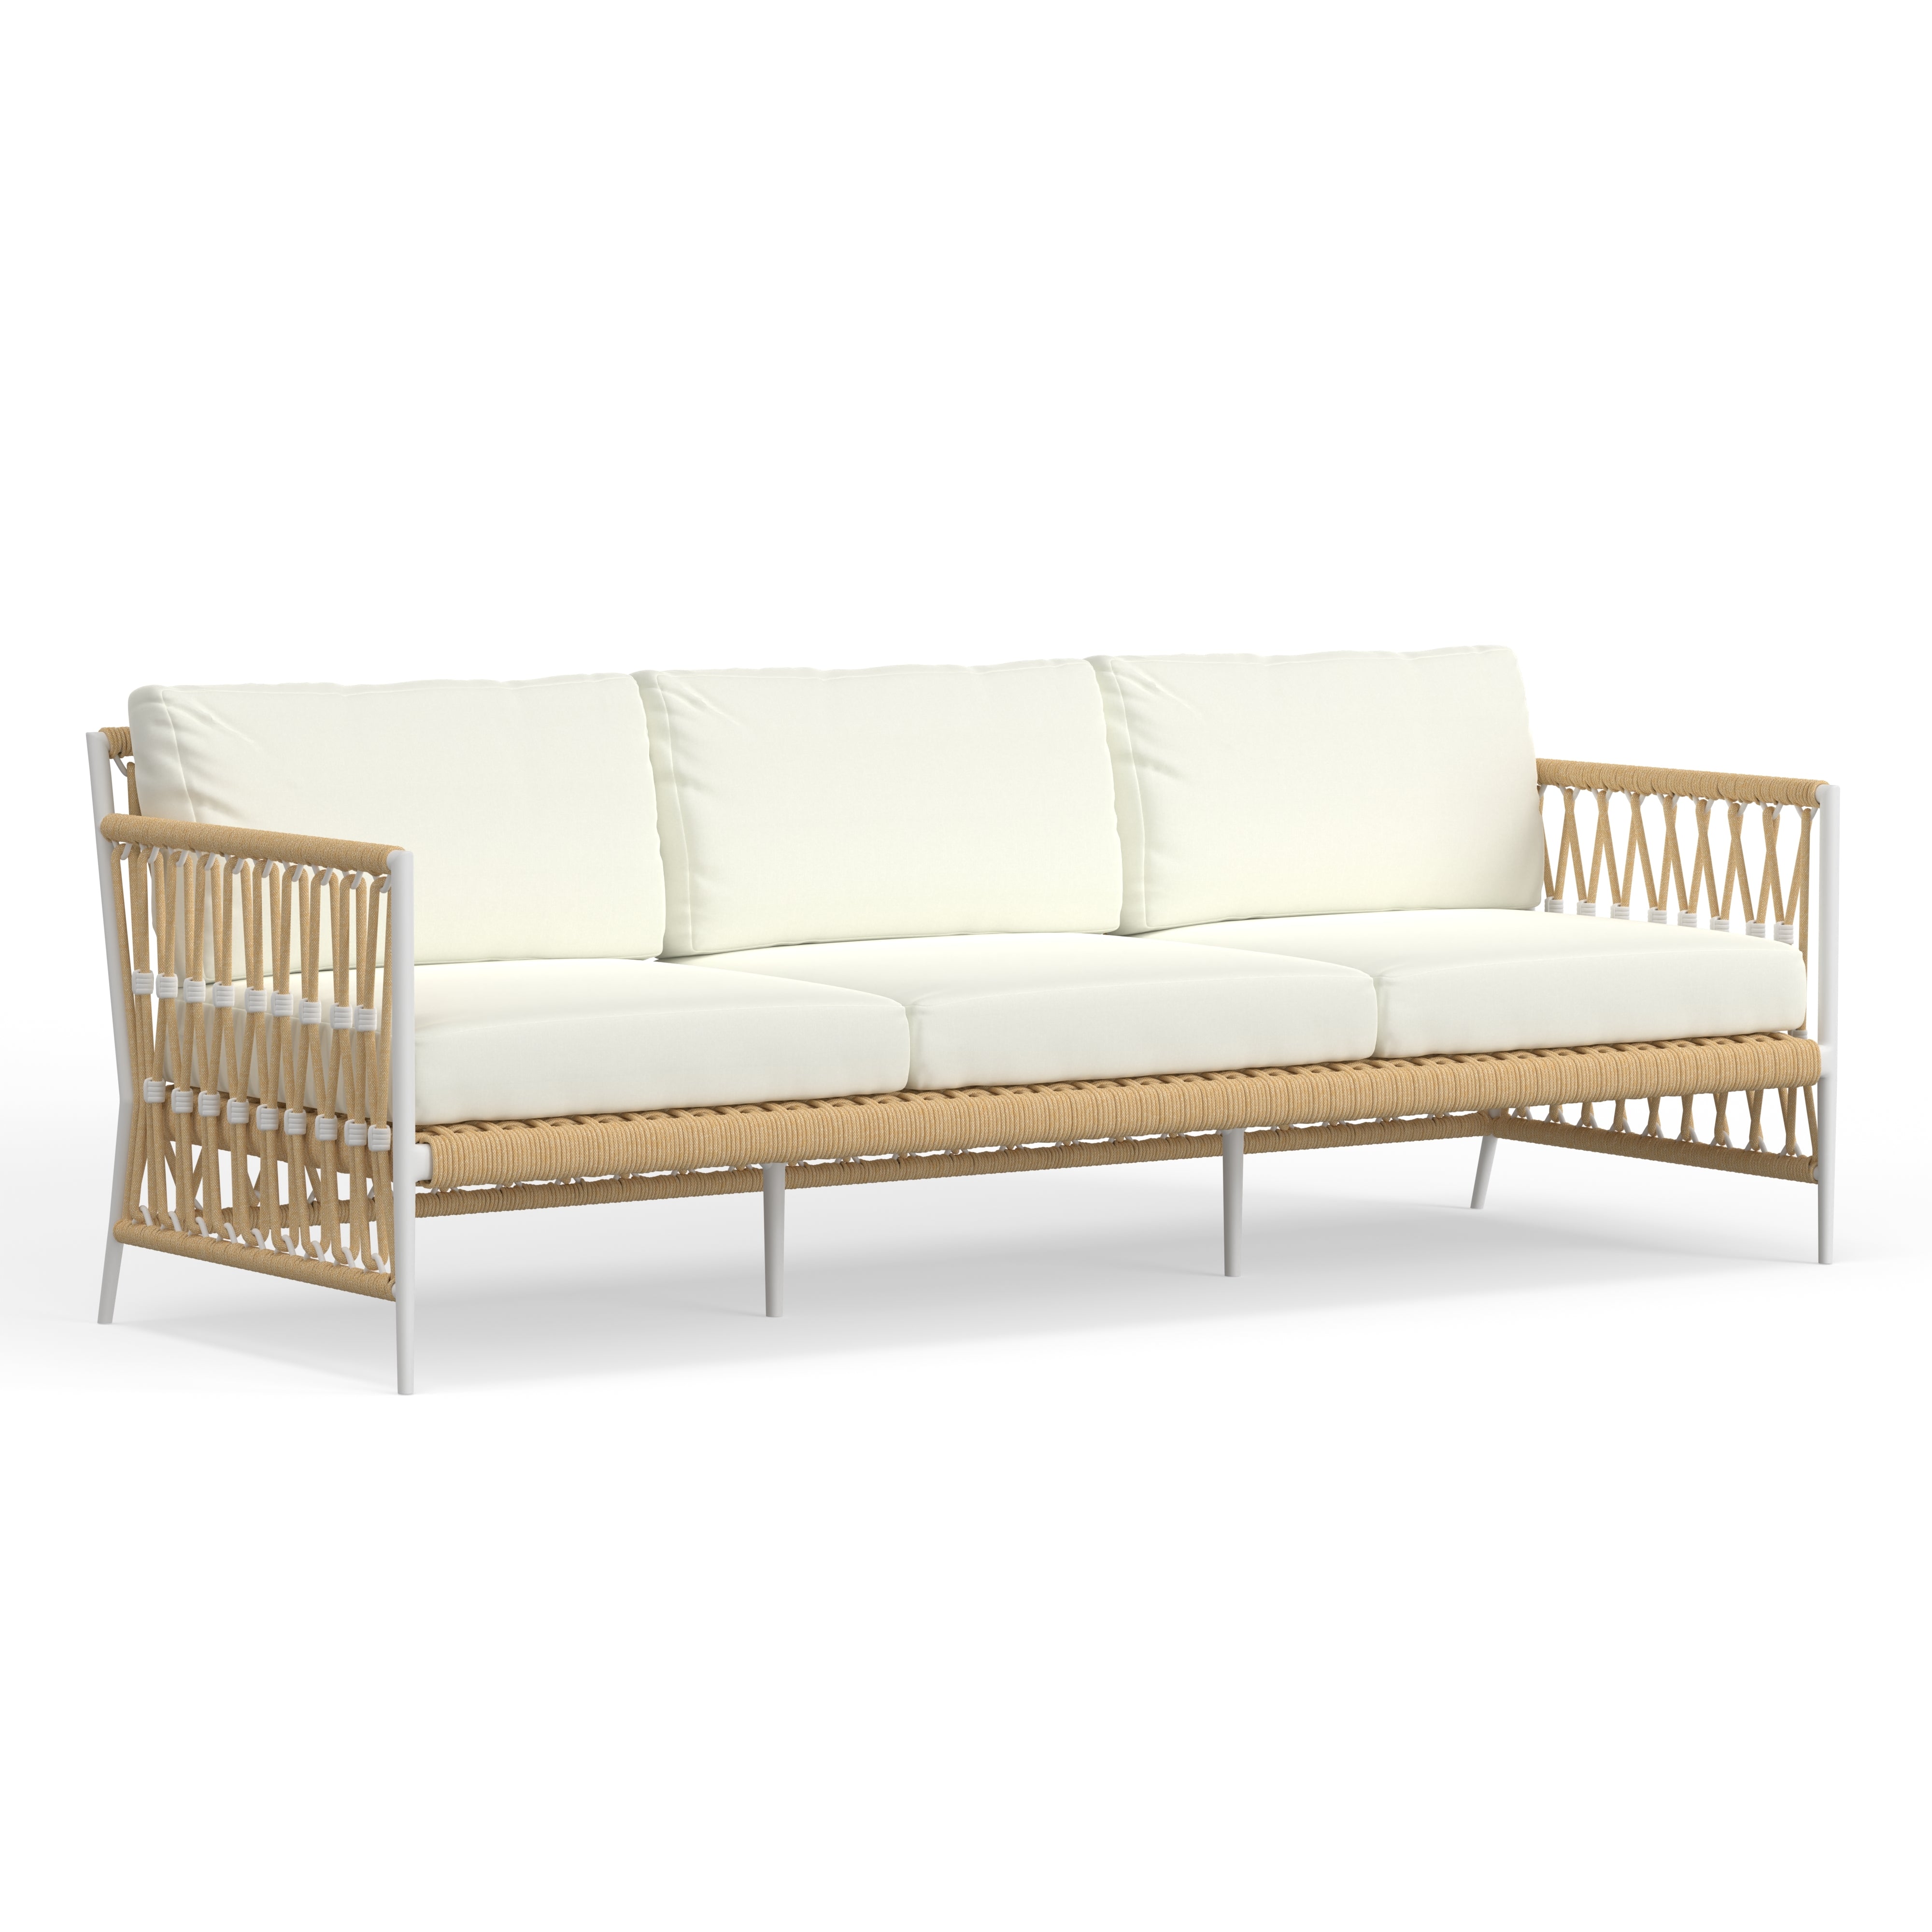 Best Quality Luxury Outdoor Sofa Featured In White Powder Coated Aluminum And Weatherproof UV Resistant Rope.